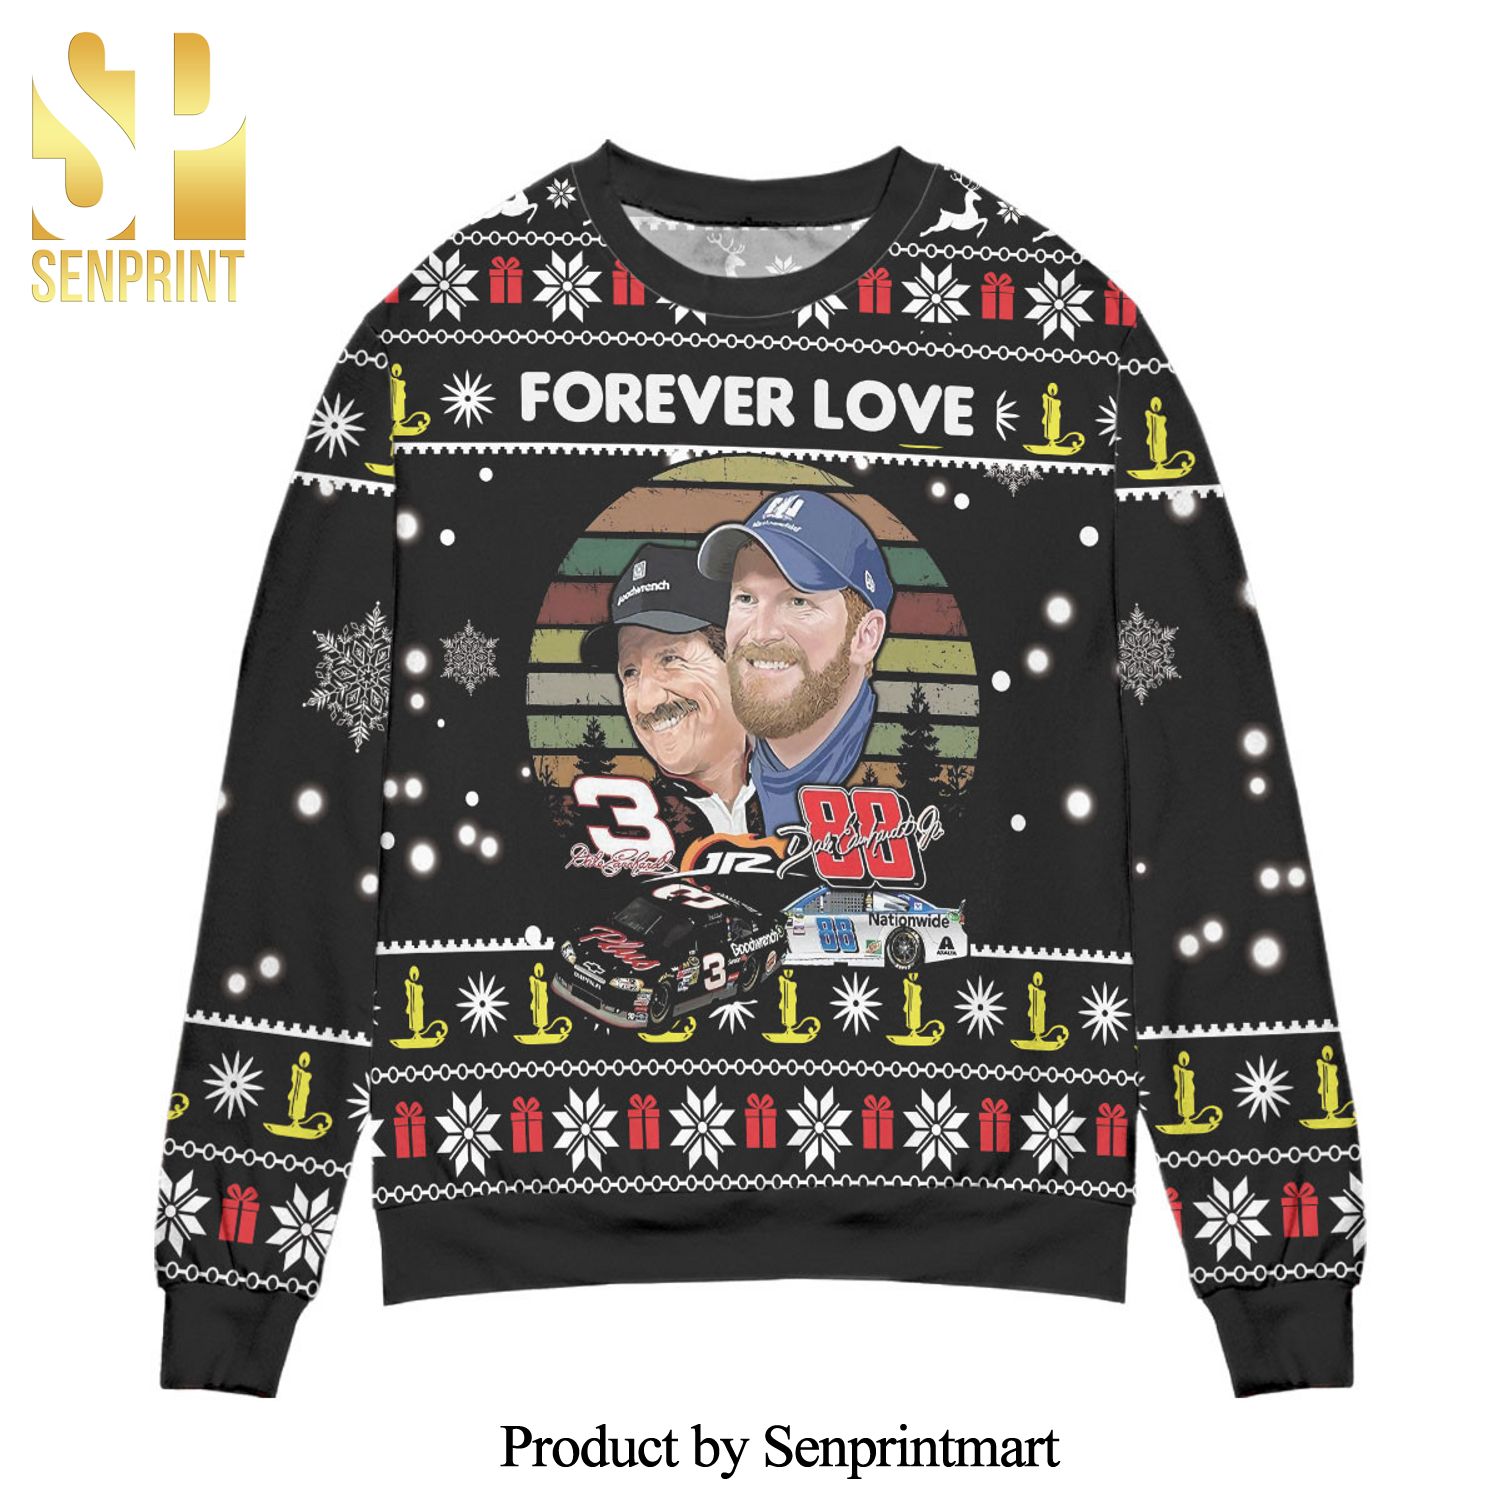 Dale Earnhardt Jr And His Dad Forever Love Knitted Ugly Christmas Sweater – Black